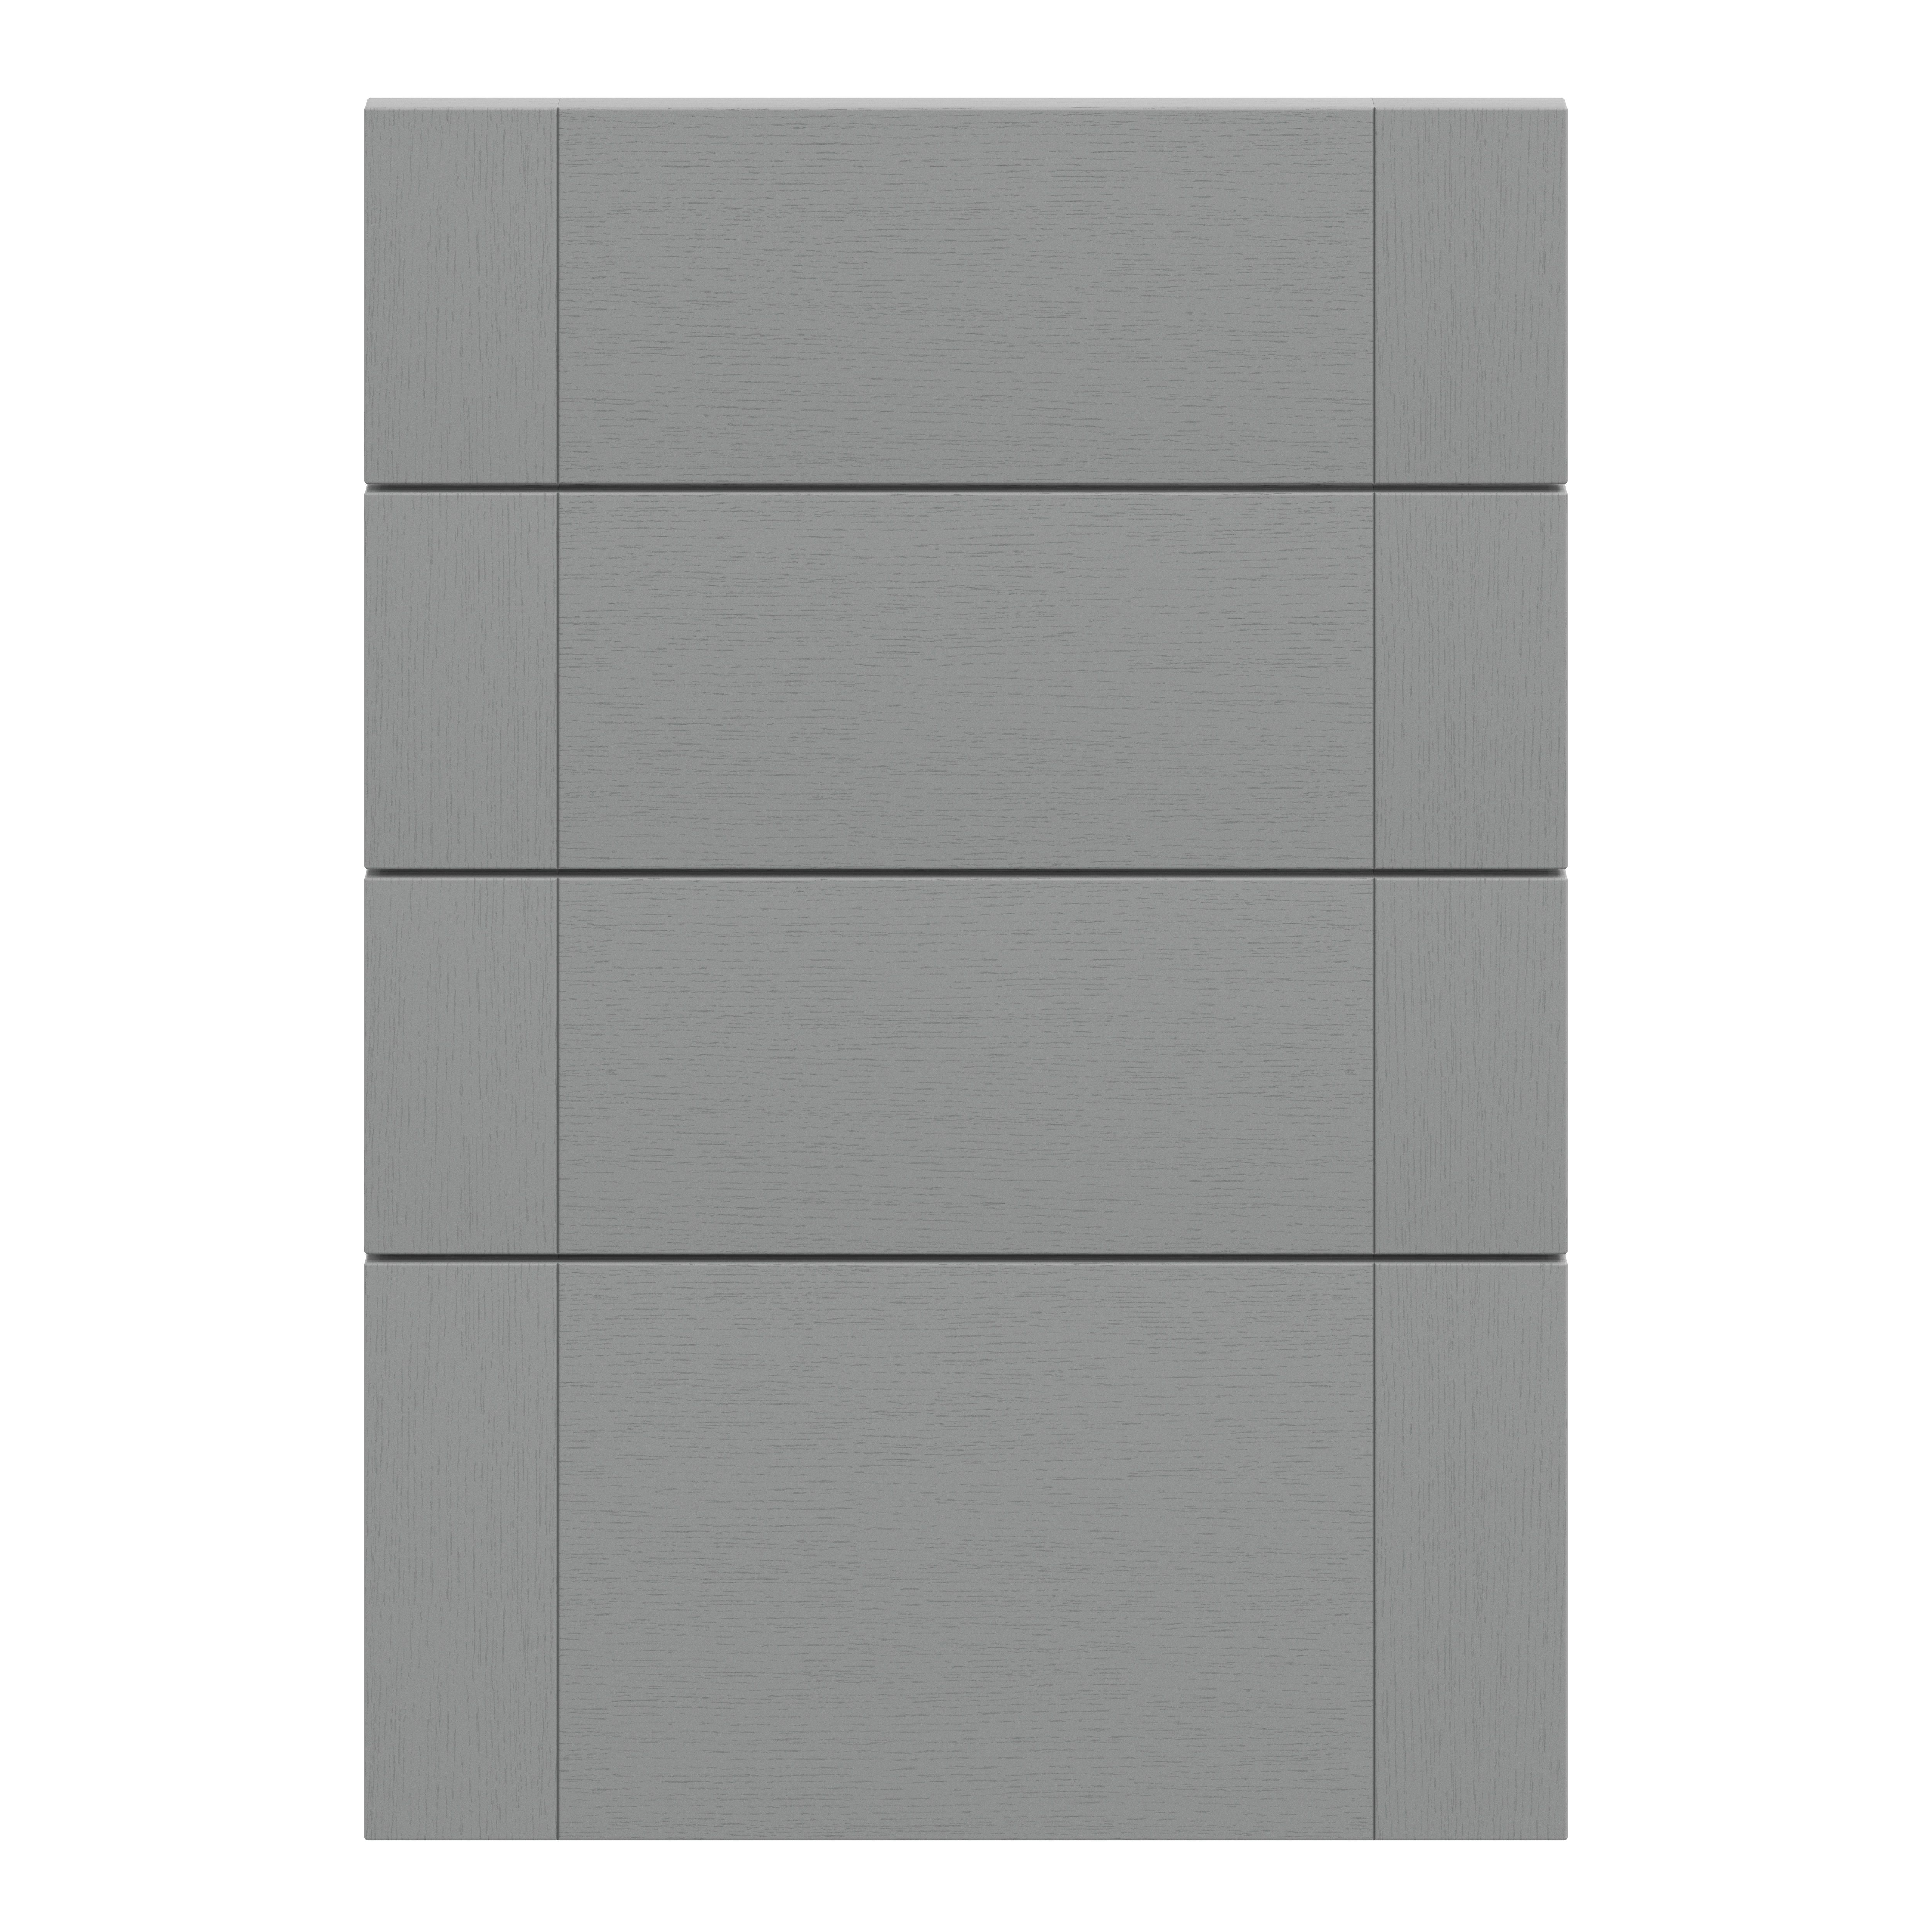 GoodHome Alpinia Matt Slate Grey Painted Wood Effect Shaker Drawer front (W)500mm, Pack of 4